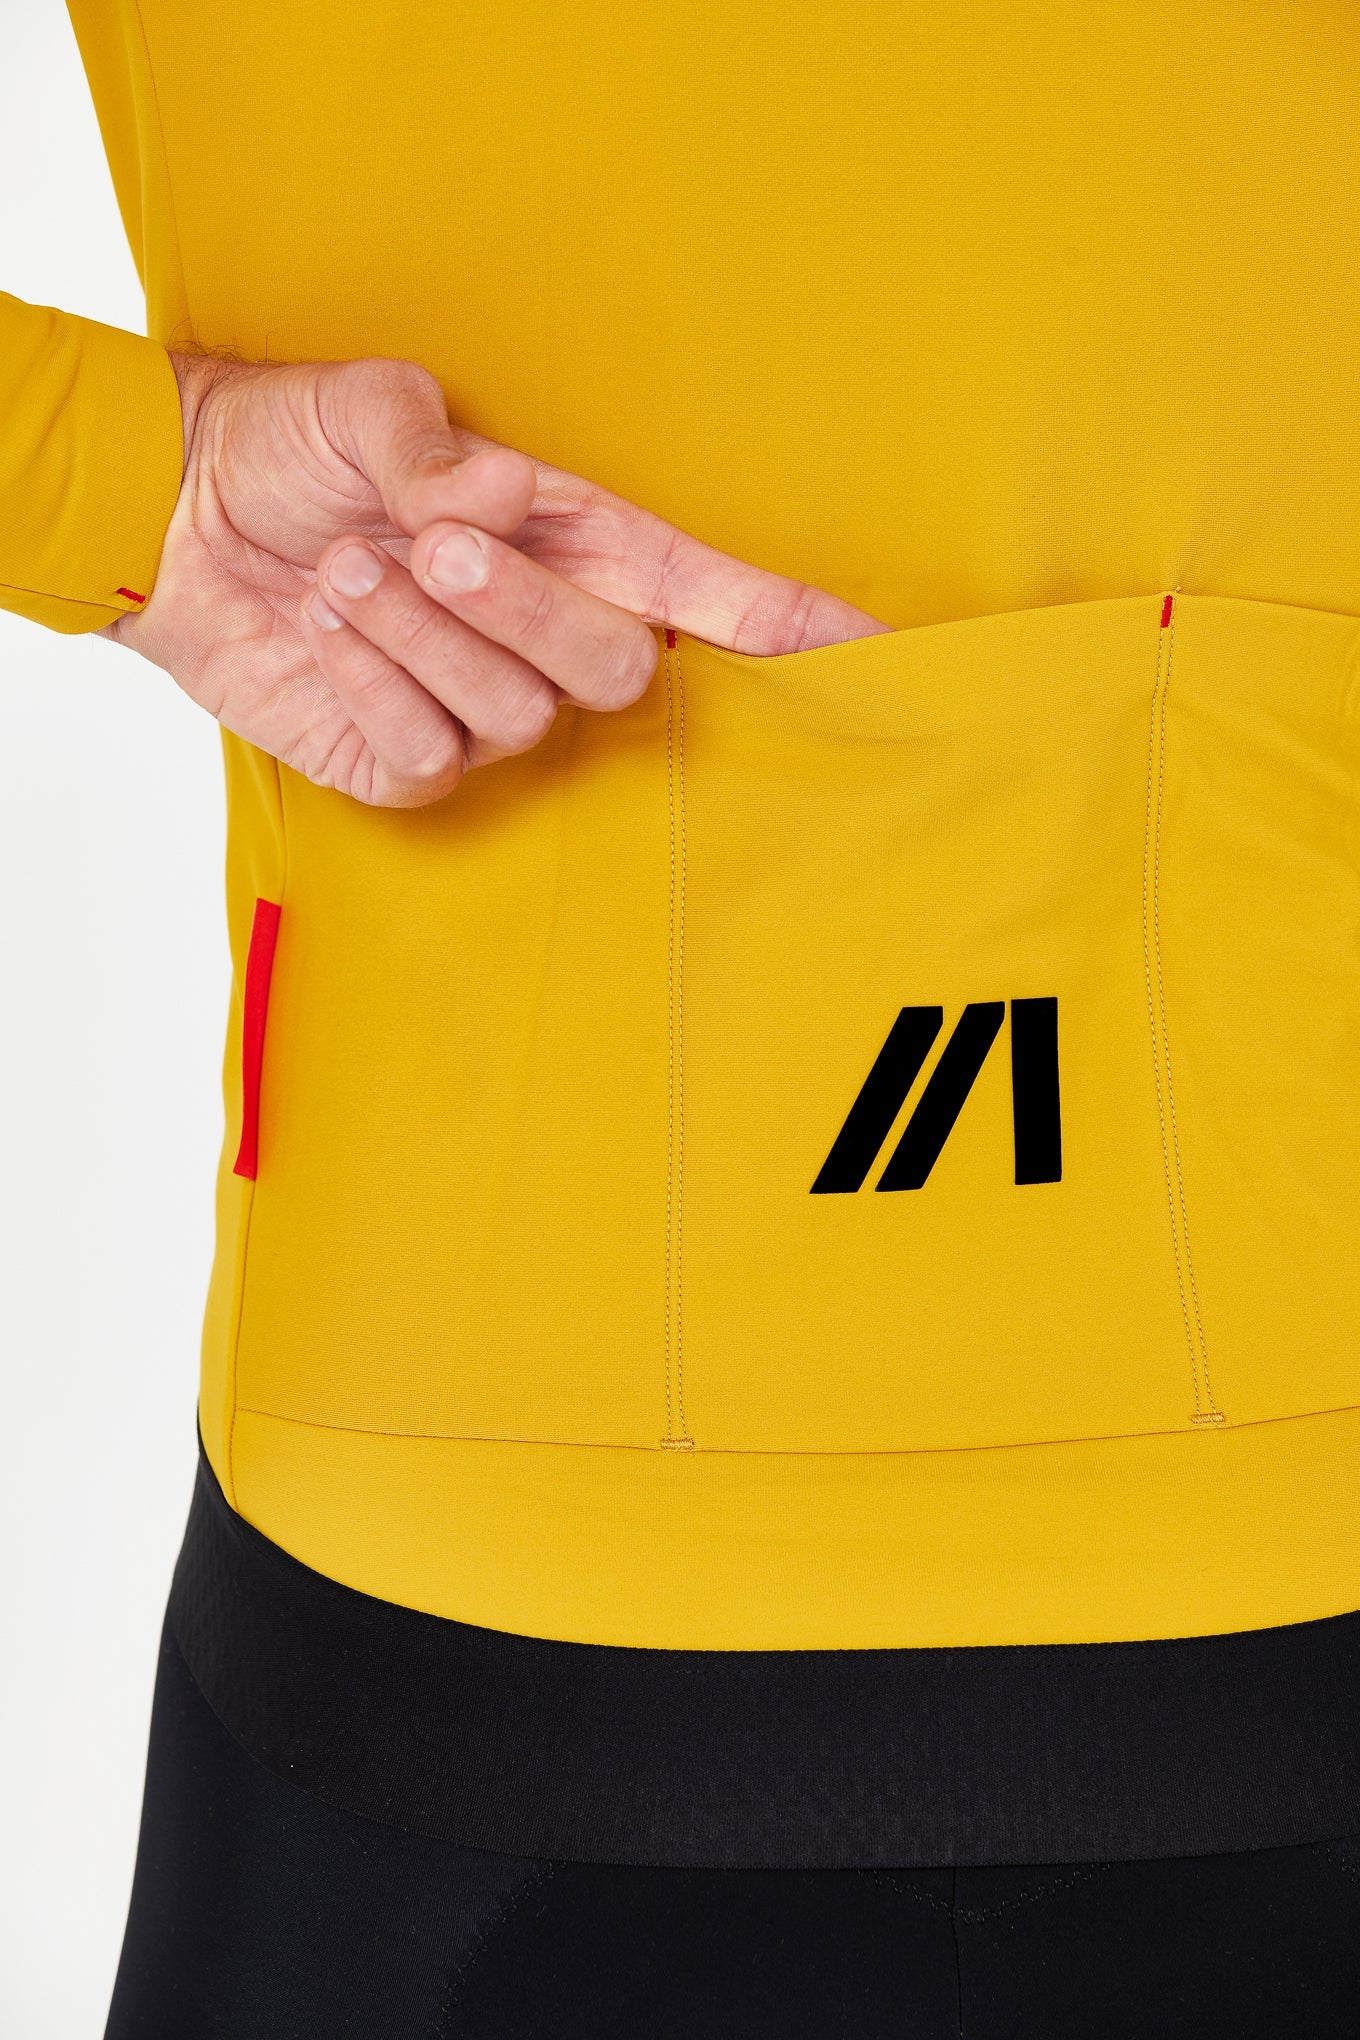 Factory Super Thermal Long Sleeve Jersey